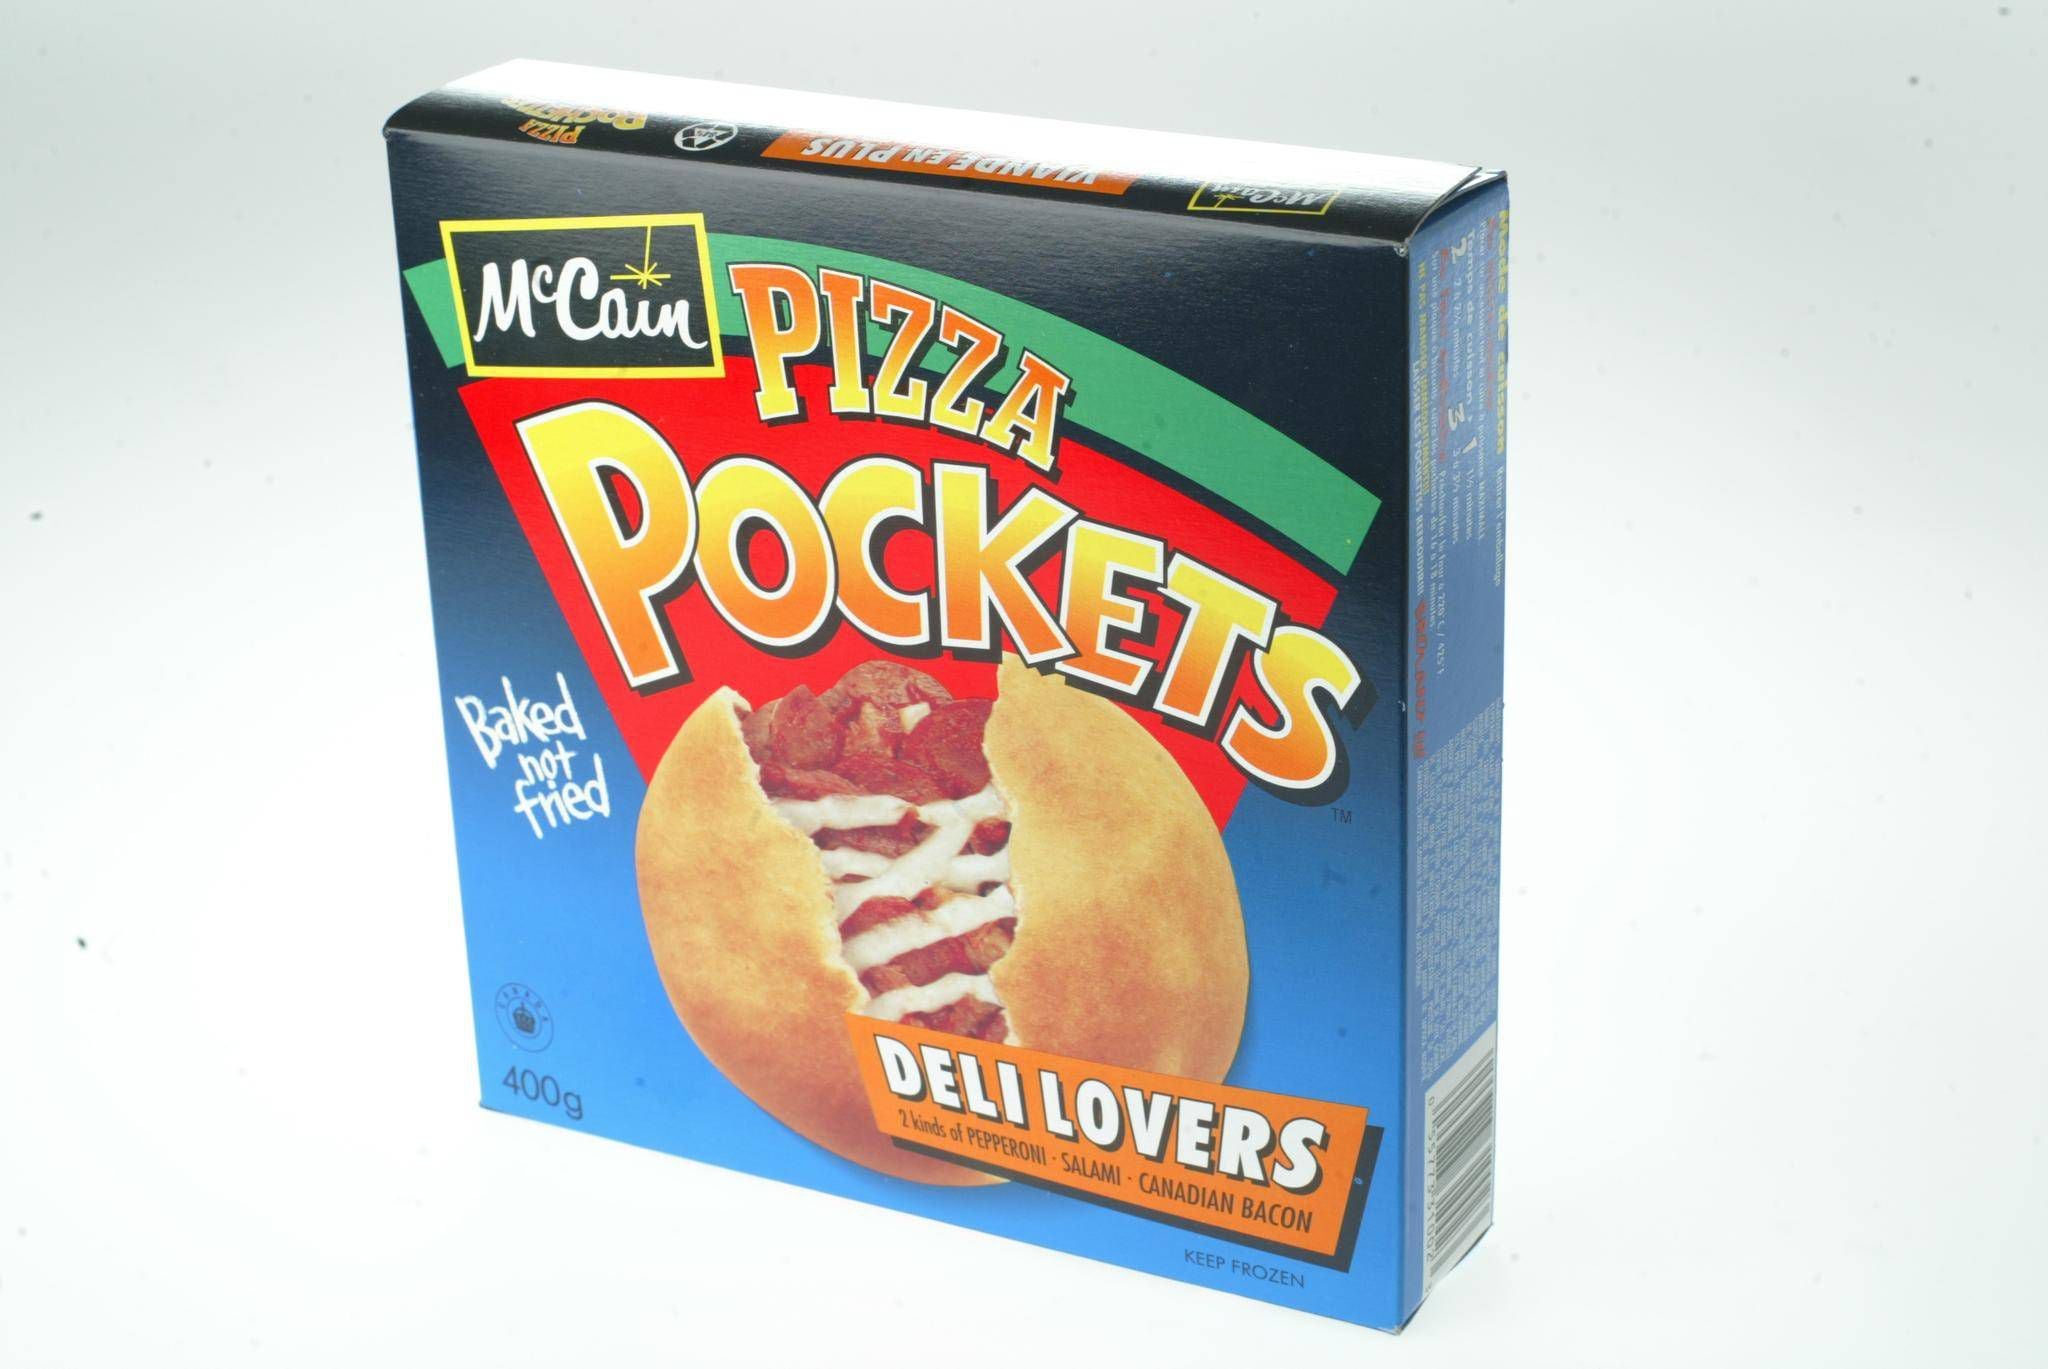 McCain's Pizza Pockets aren't dead, they're just getting a